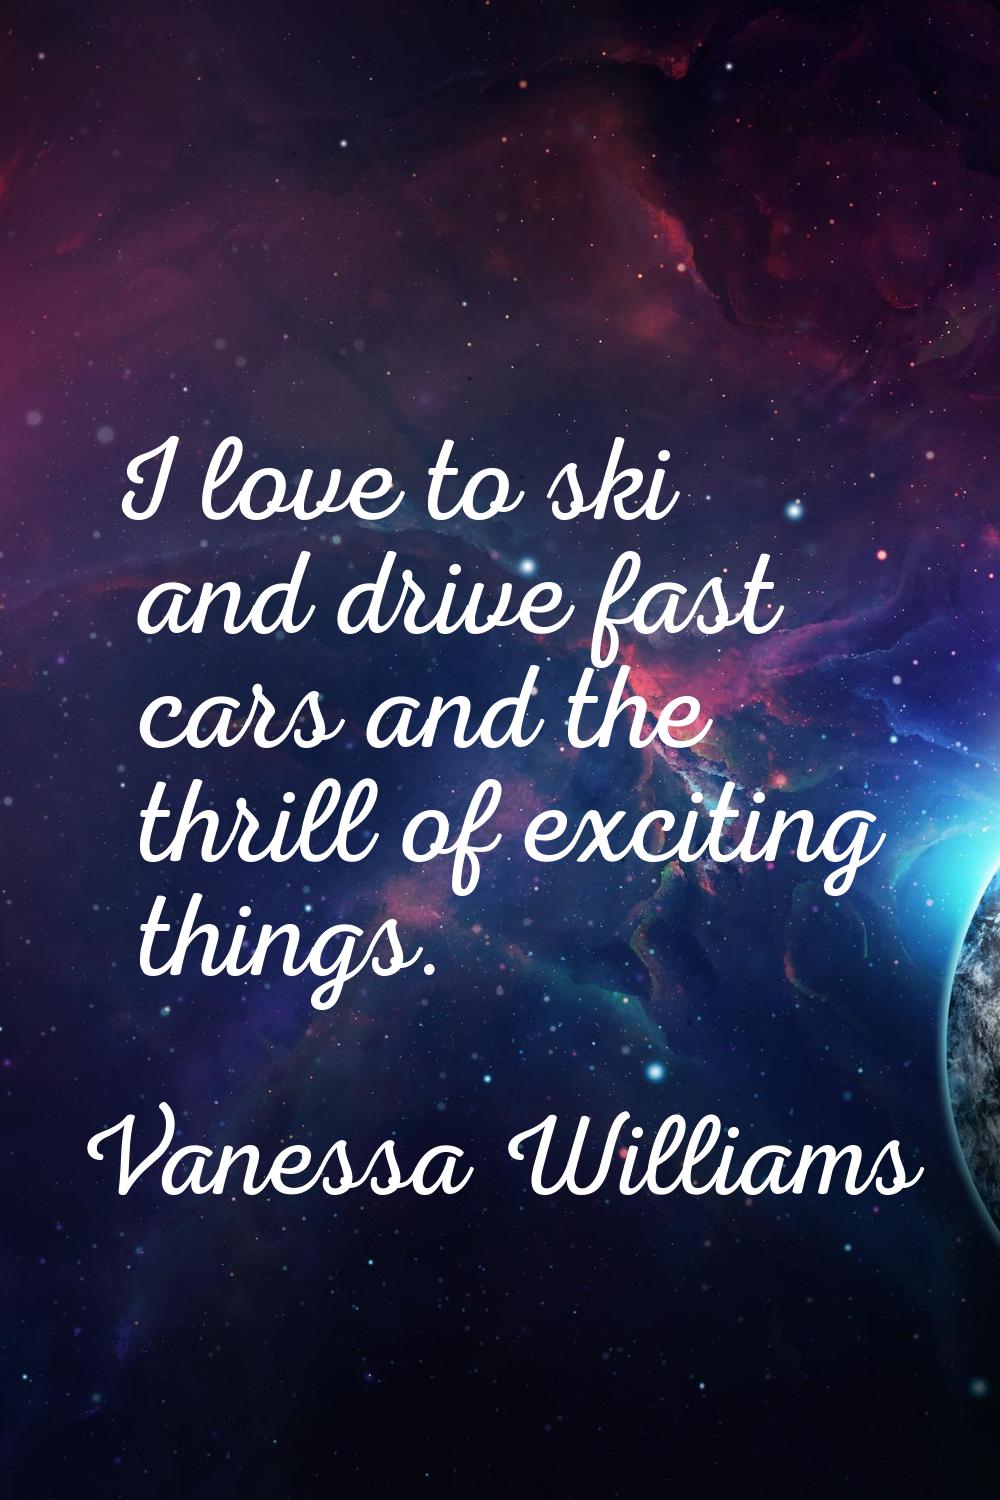 I love to ski and drive fast cars and the thrill of exciting things.